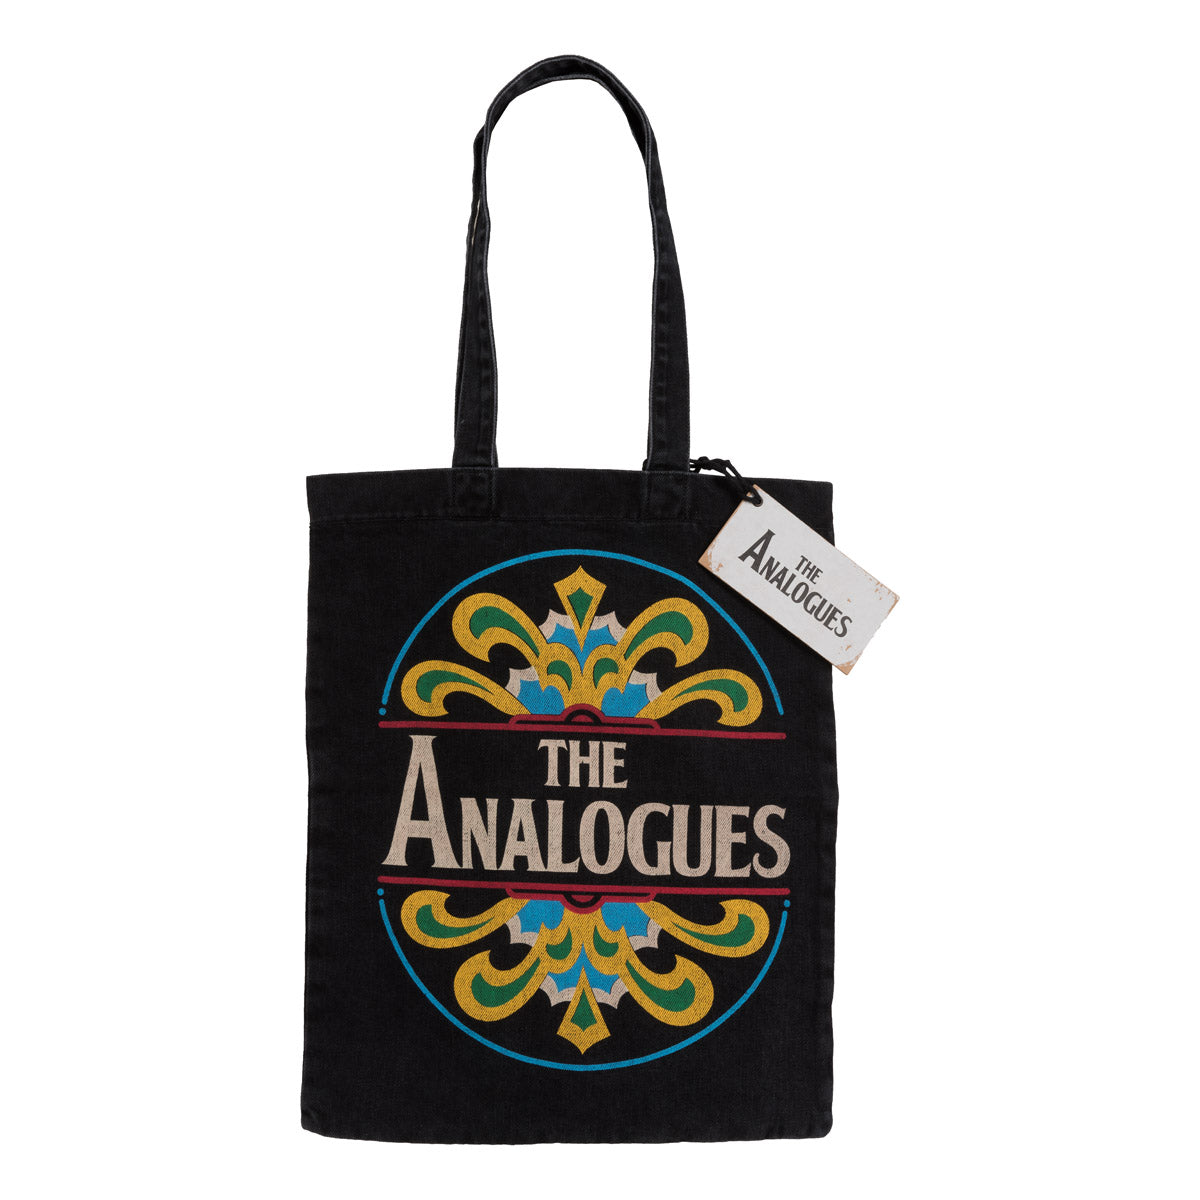 The Analogues | Sgt. Pepper tote bag